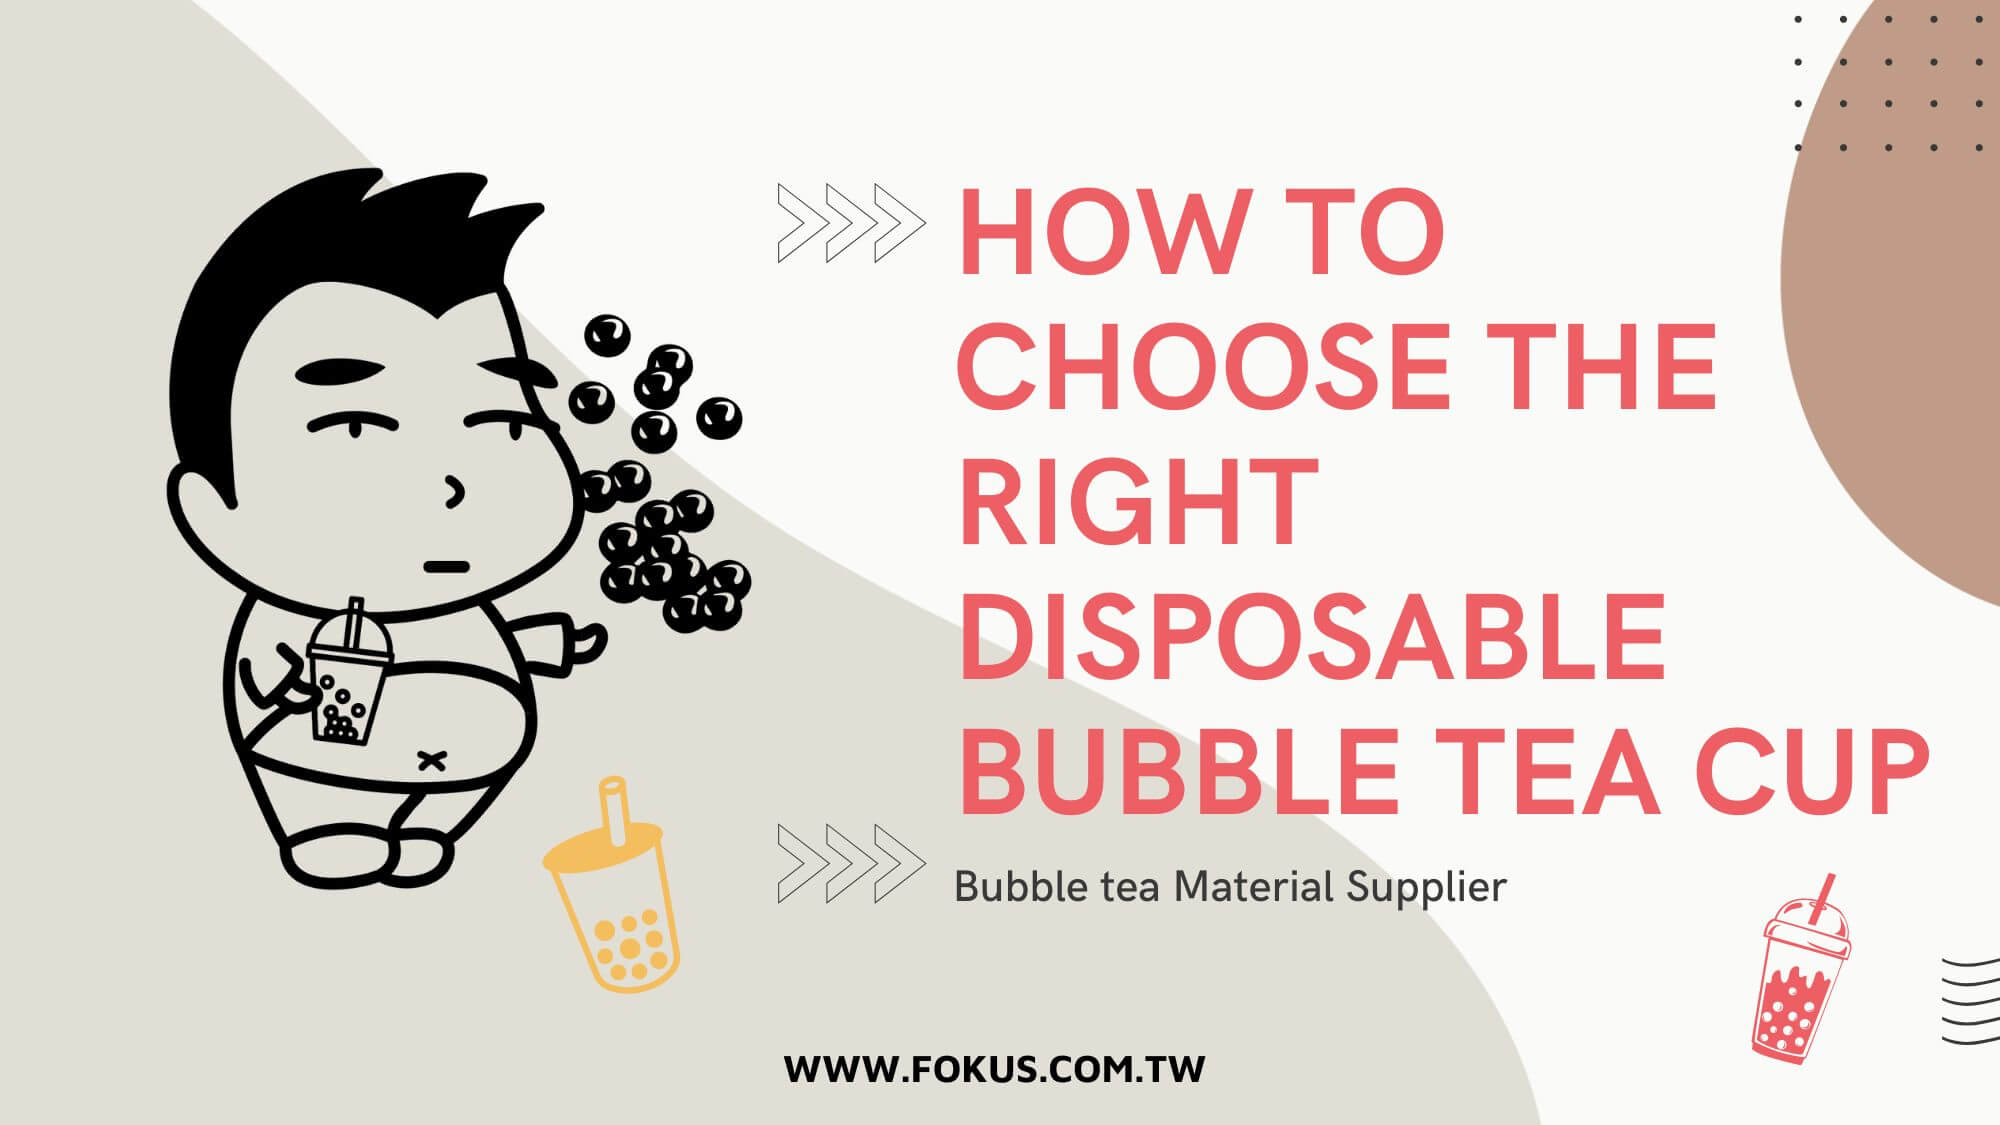 How to Choose the Right Disposable Cup for your Bubble Tea